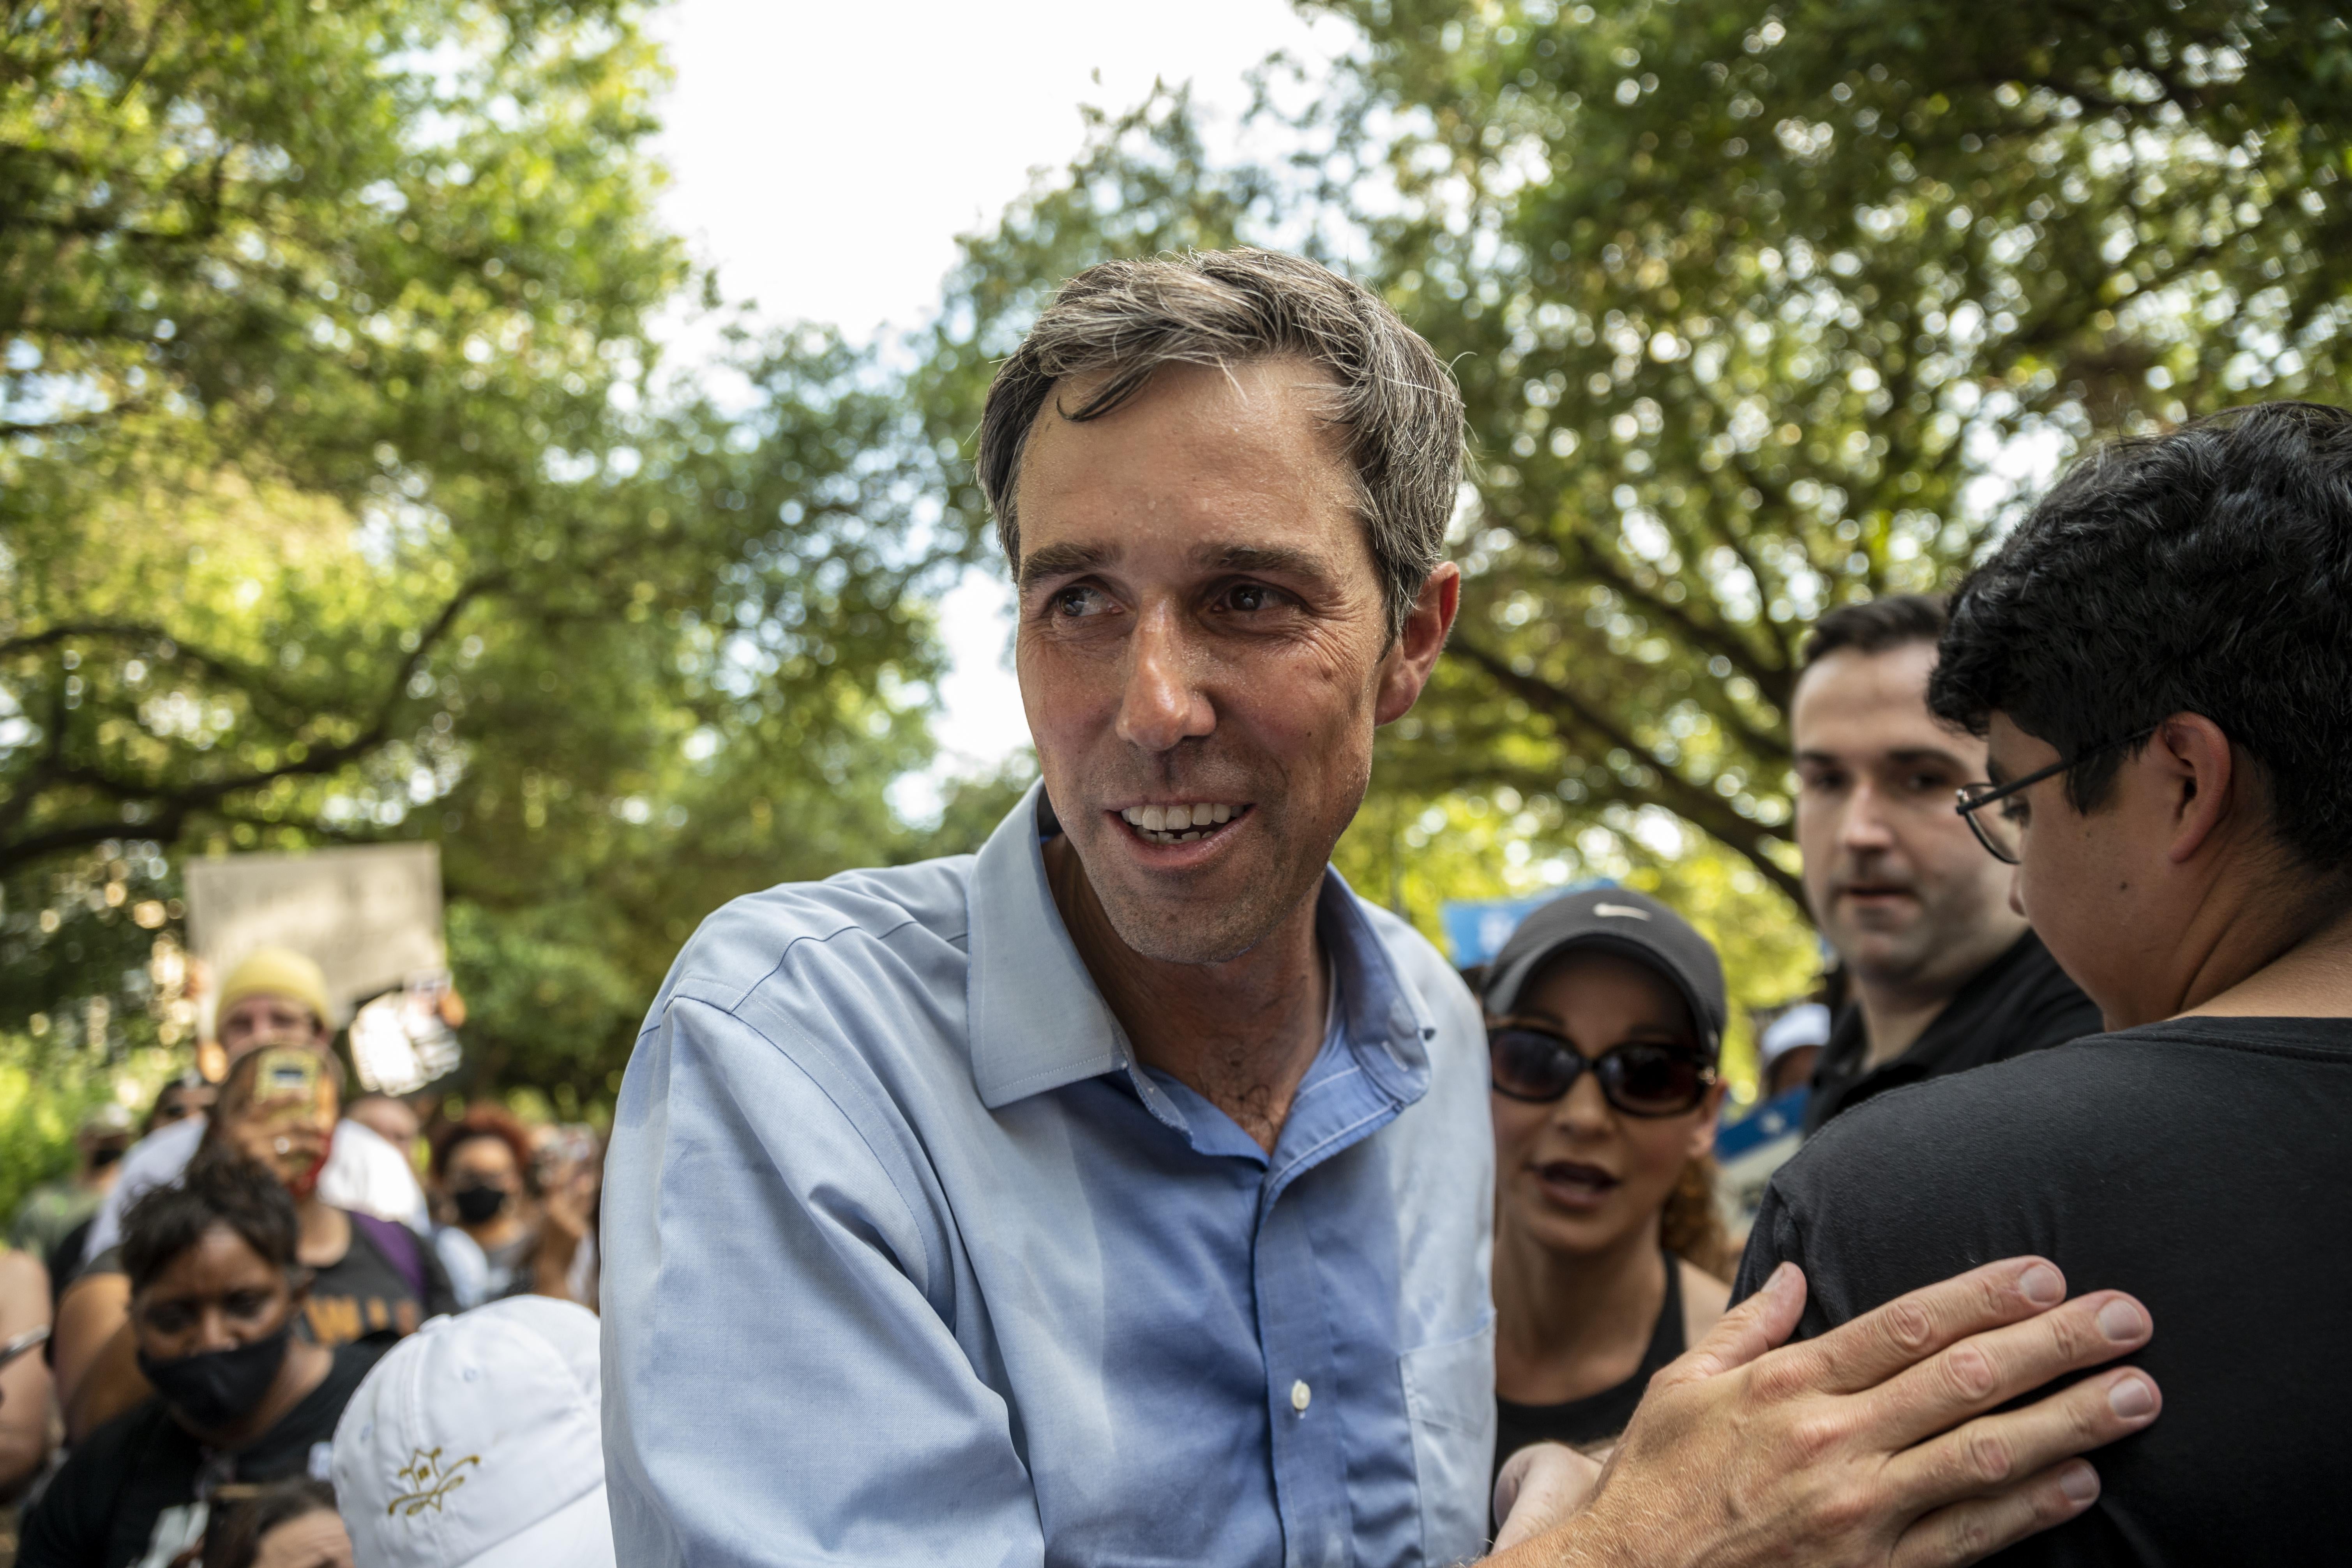 Beto in a button-down drenched in sweat smiles and pats someone's back as he walks through a crowd in a tree-lined area